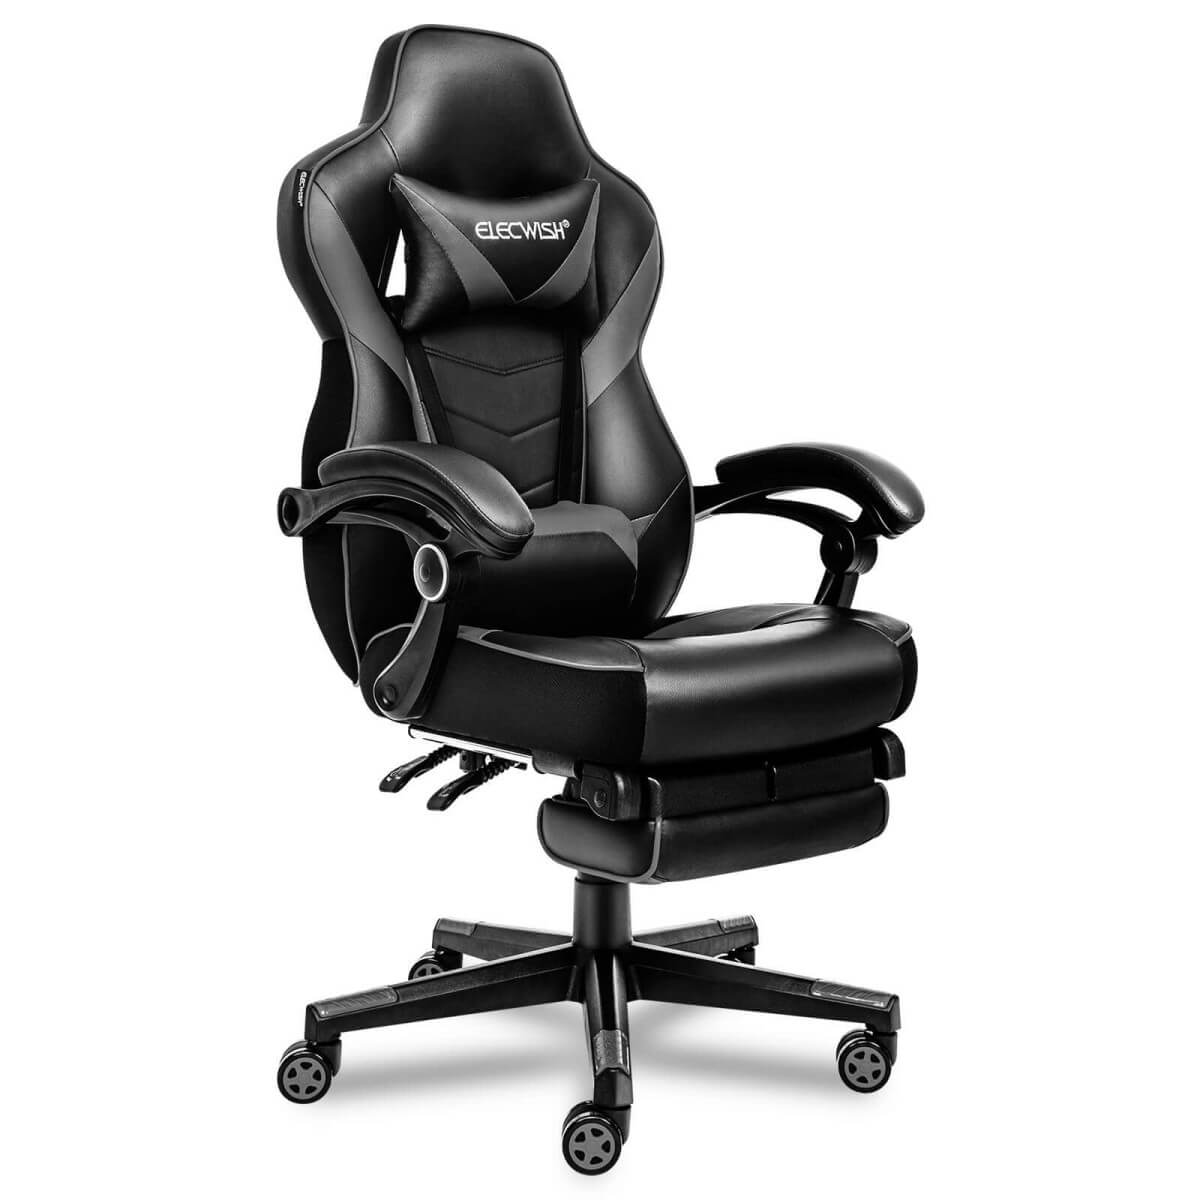 Dropship PU Gaming Chair, Swivel Recliner With Adjustable Backrest